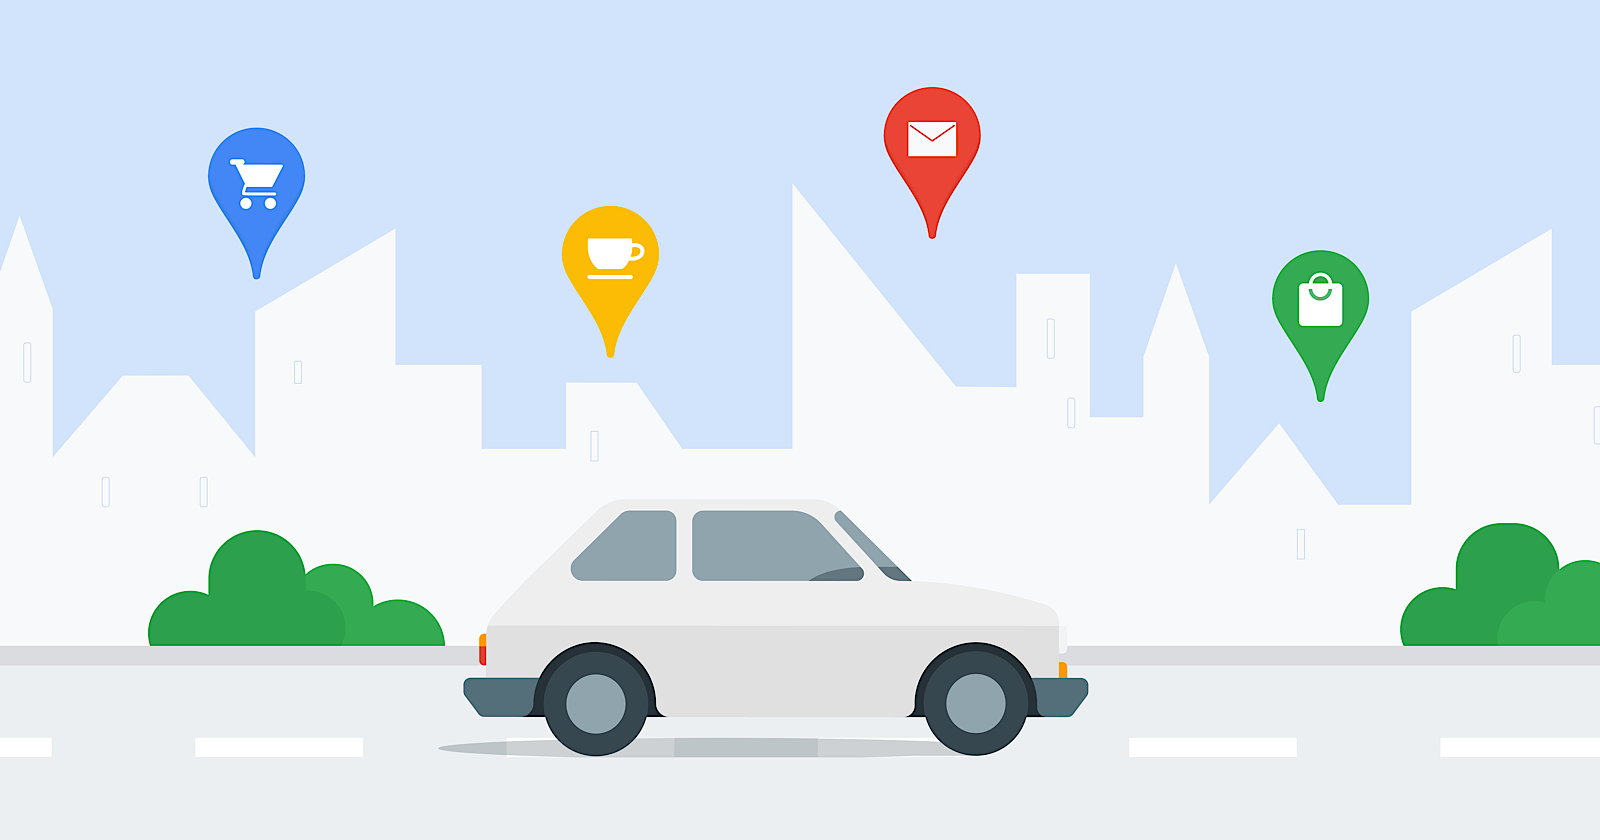 google-maps-introduces-new-ways-to-plan-travel-&-navigate